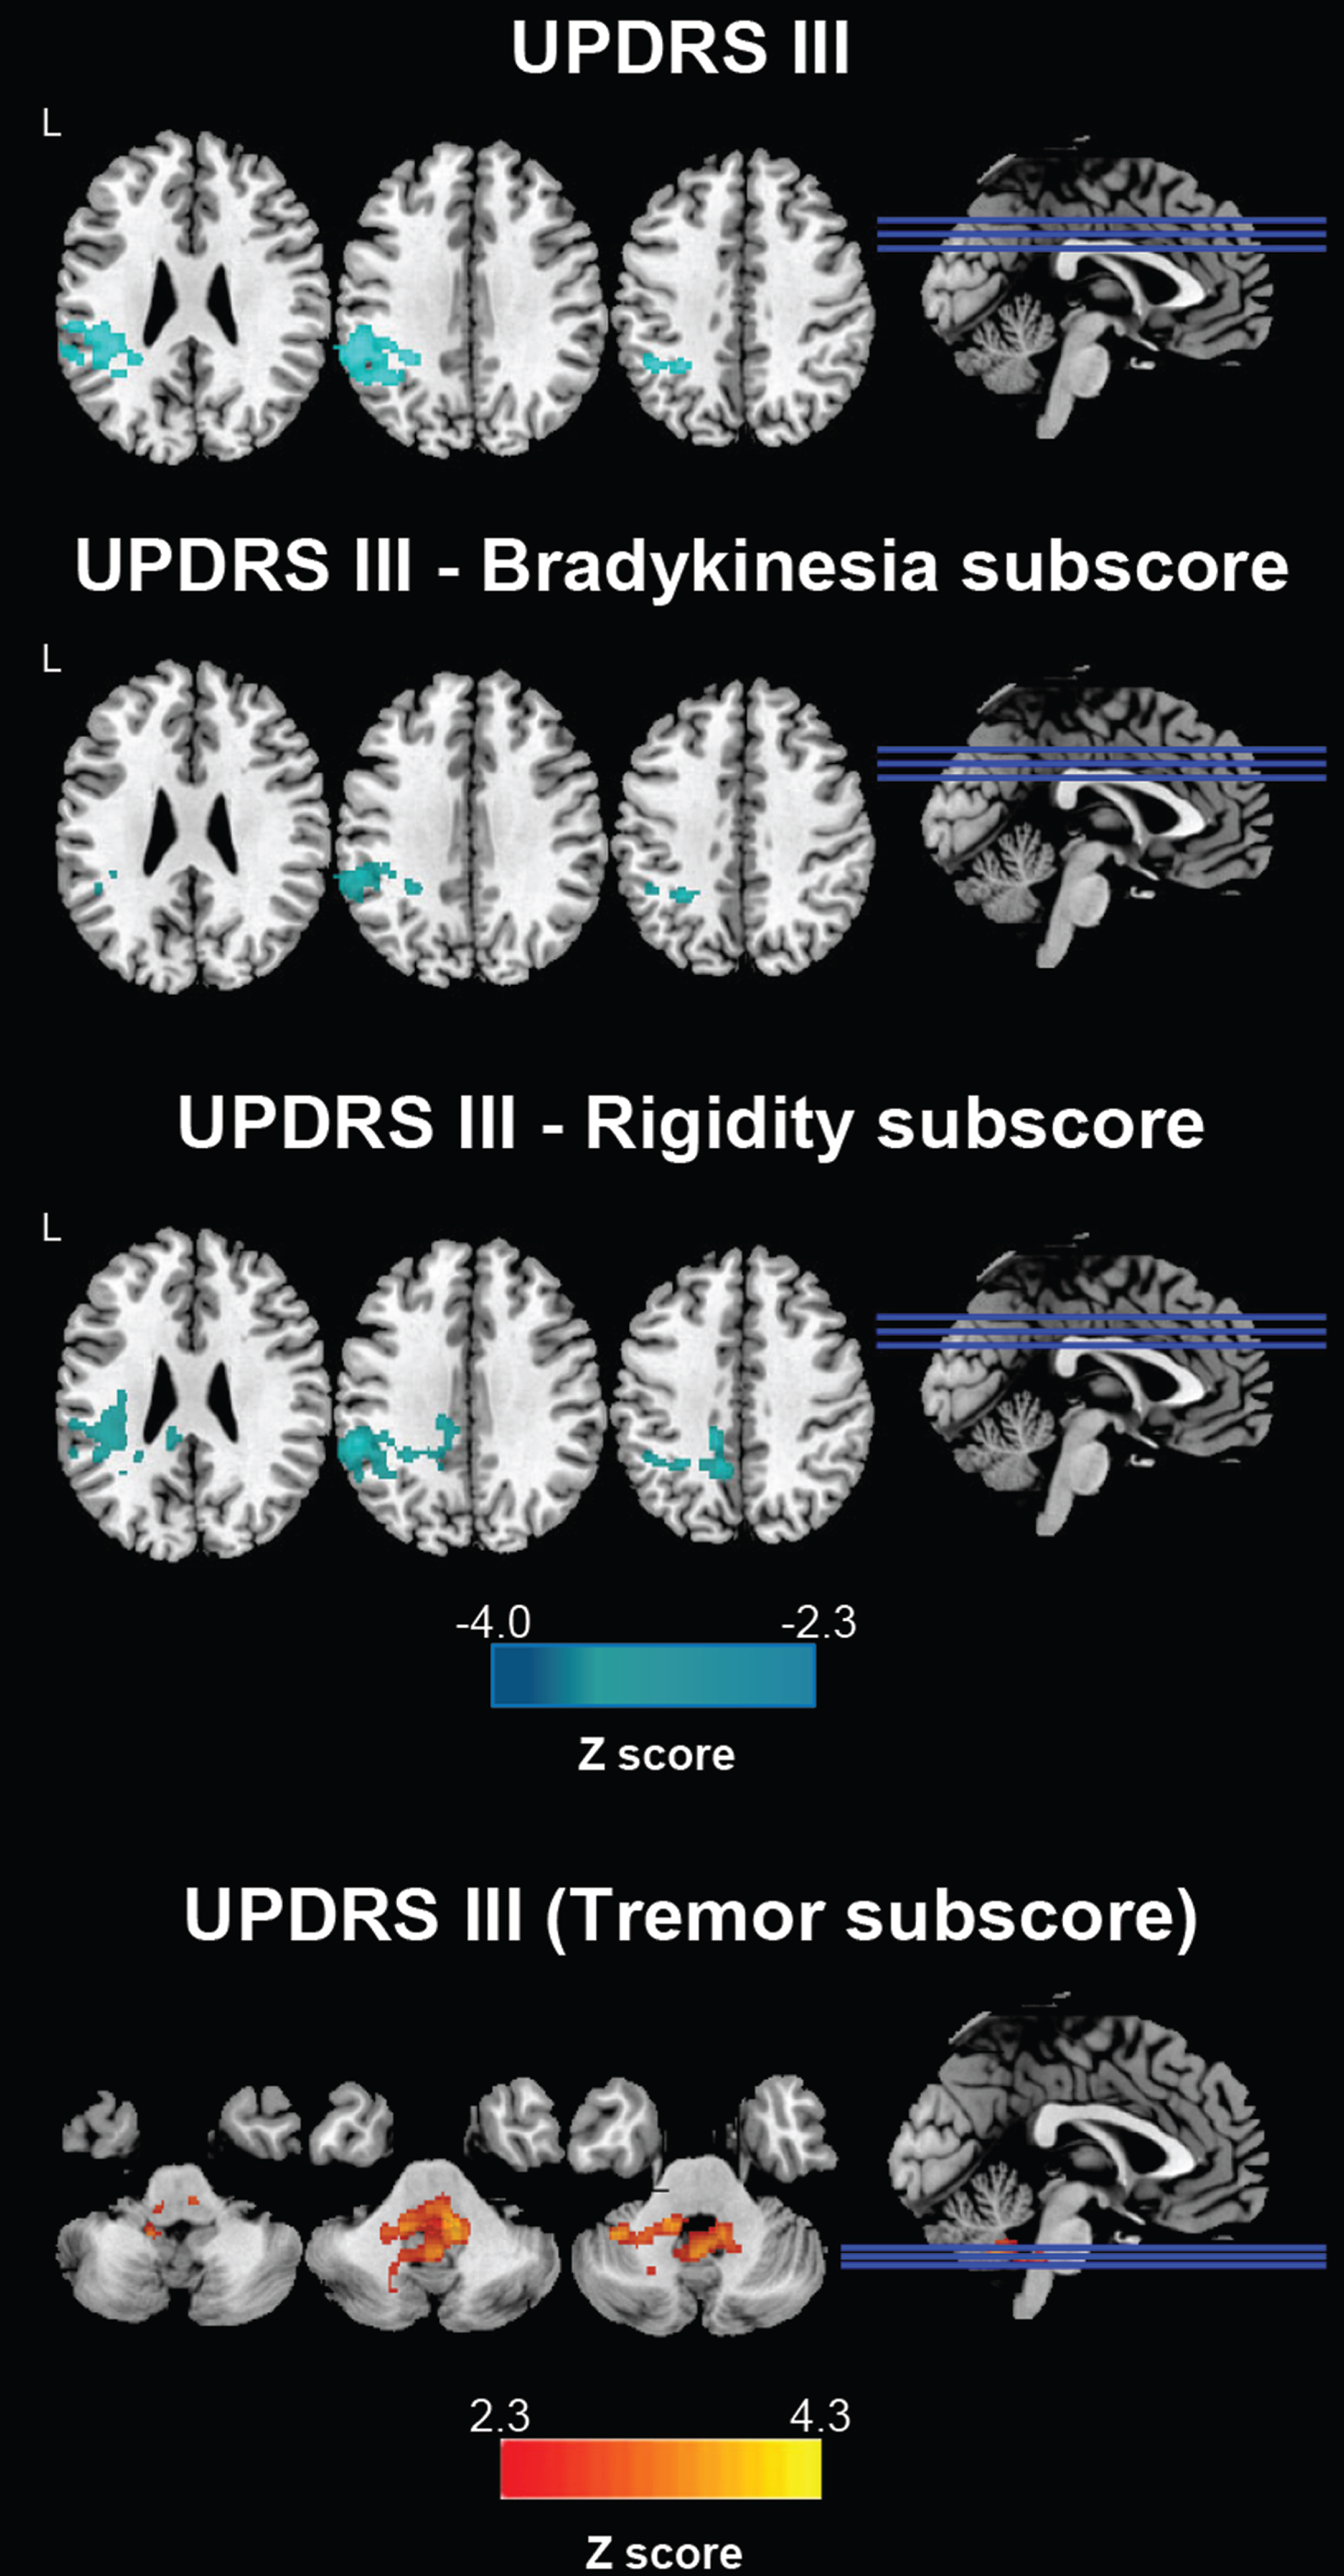 Correlations between STN functional connectivity and UPDRS-III scores in PD candidates for DBS. Clusters showing significant correlation between STN functional connectivity and UPDRS III values are marked in blue (Z negative correlation) and red (Z positive correlation) colors. DBS, candidates for deep brain stimulation; STN, subthalamic nucleus.